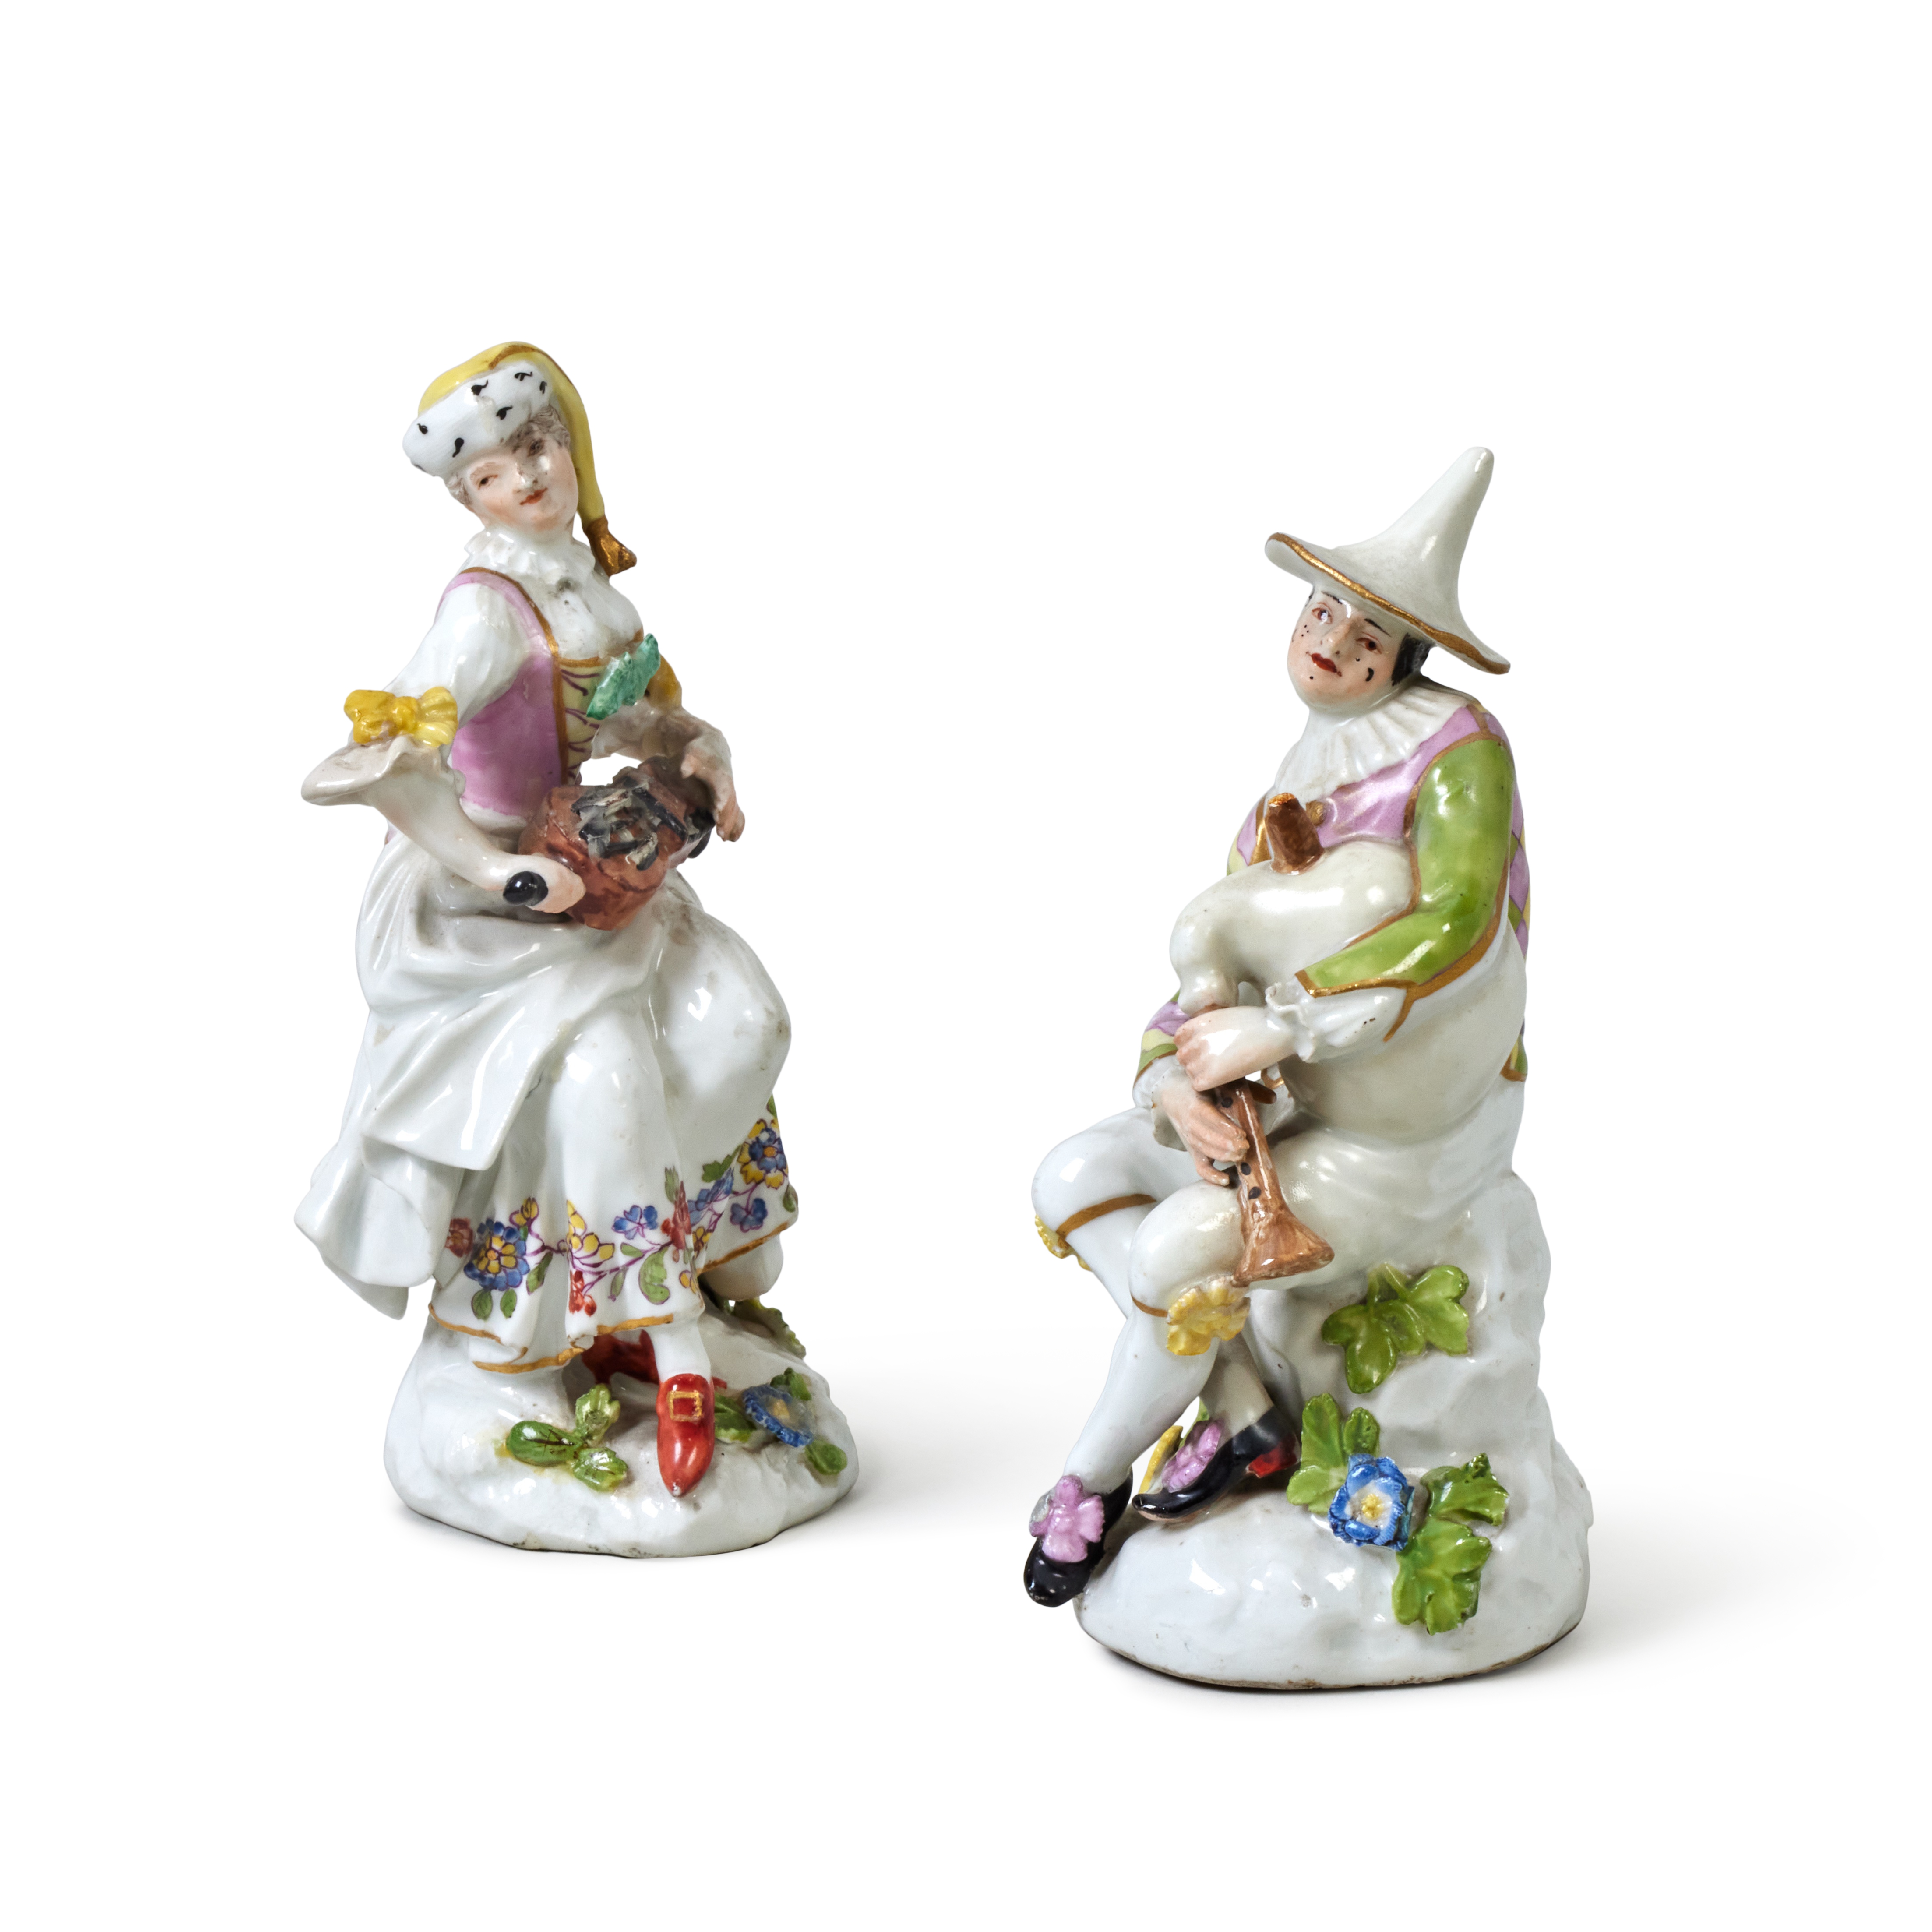 A Meissen Figure of Harlequin Playing Bagpipes and A Meissen Figure of a Lady, Probably Columbine, P